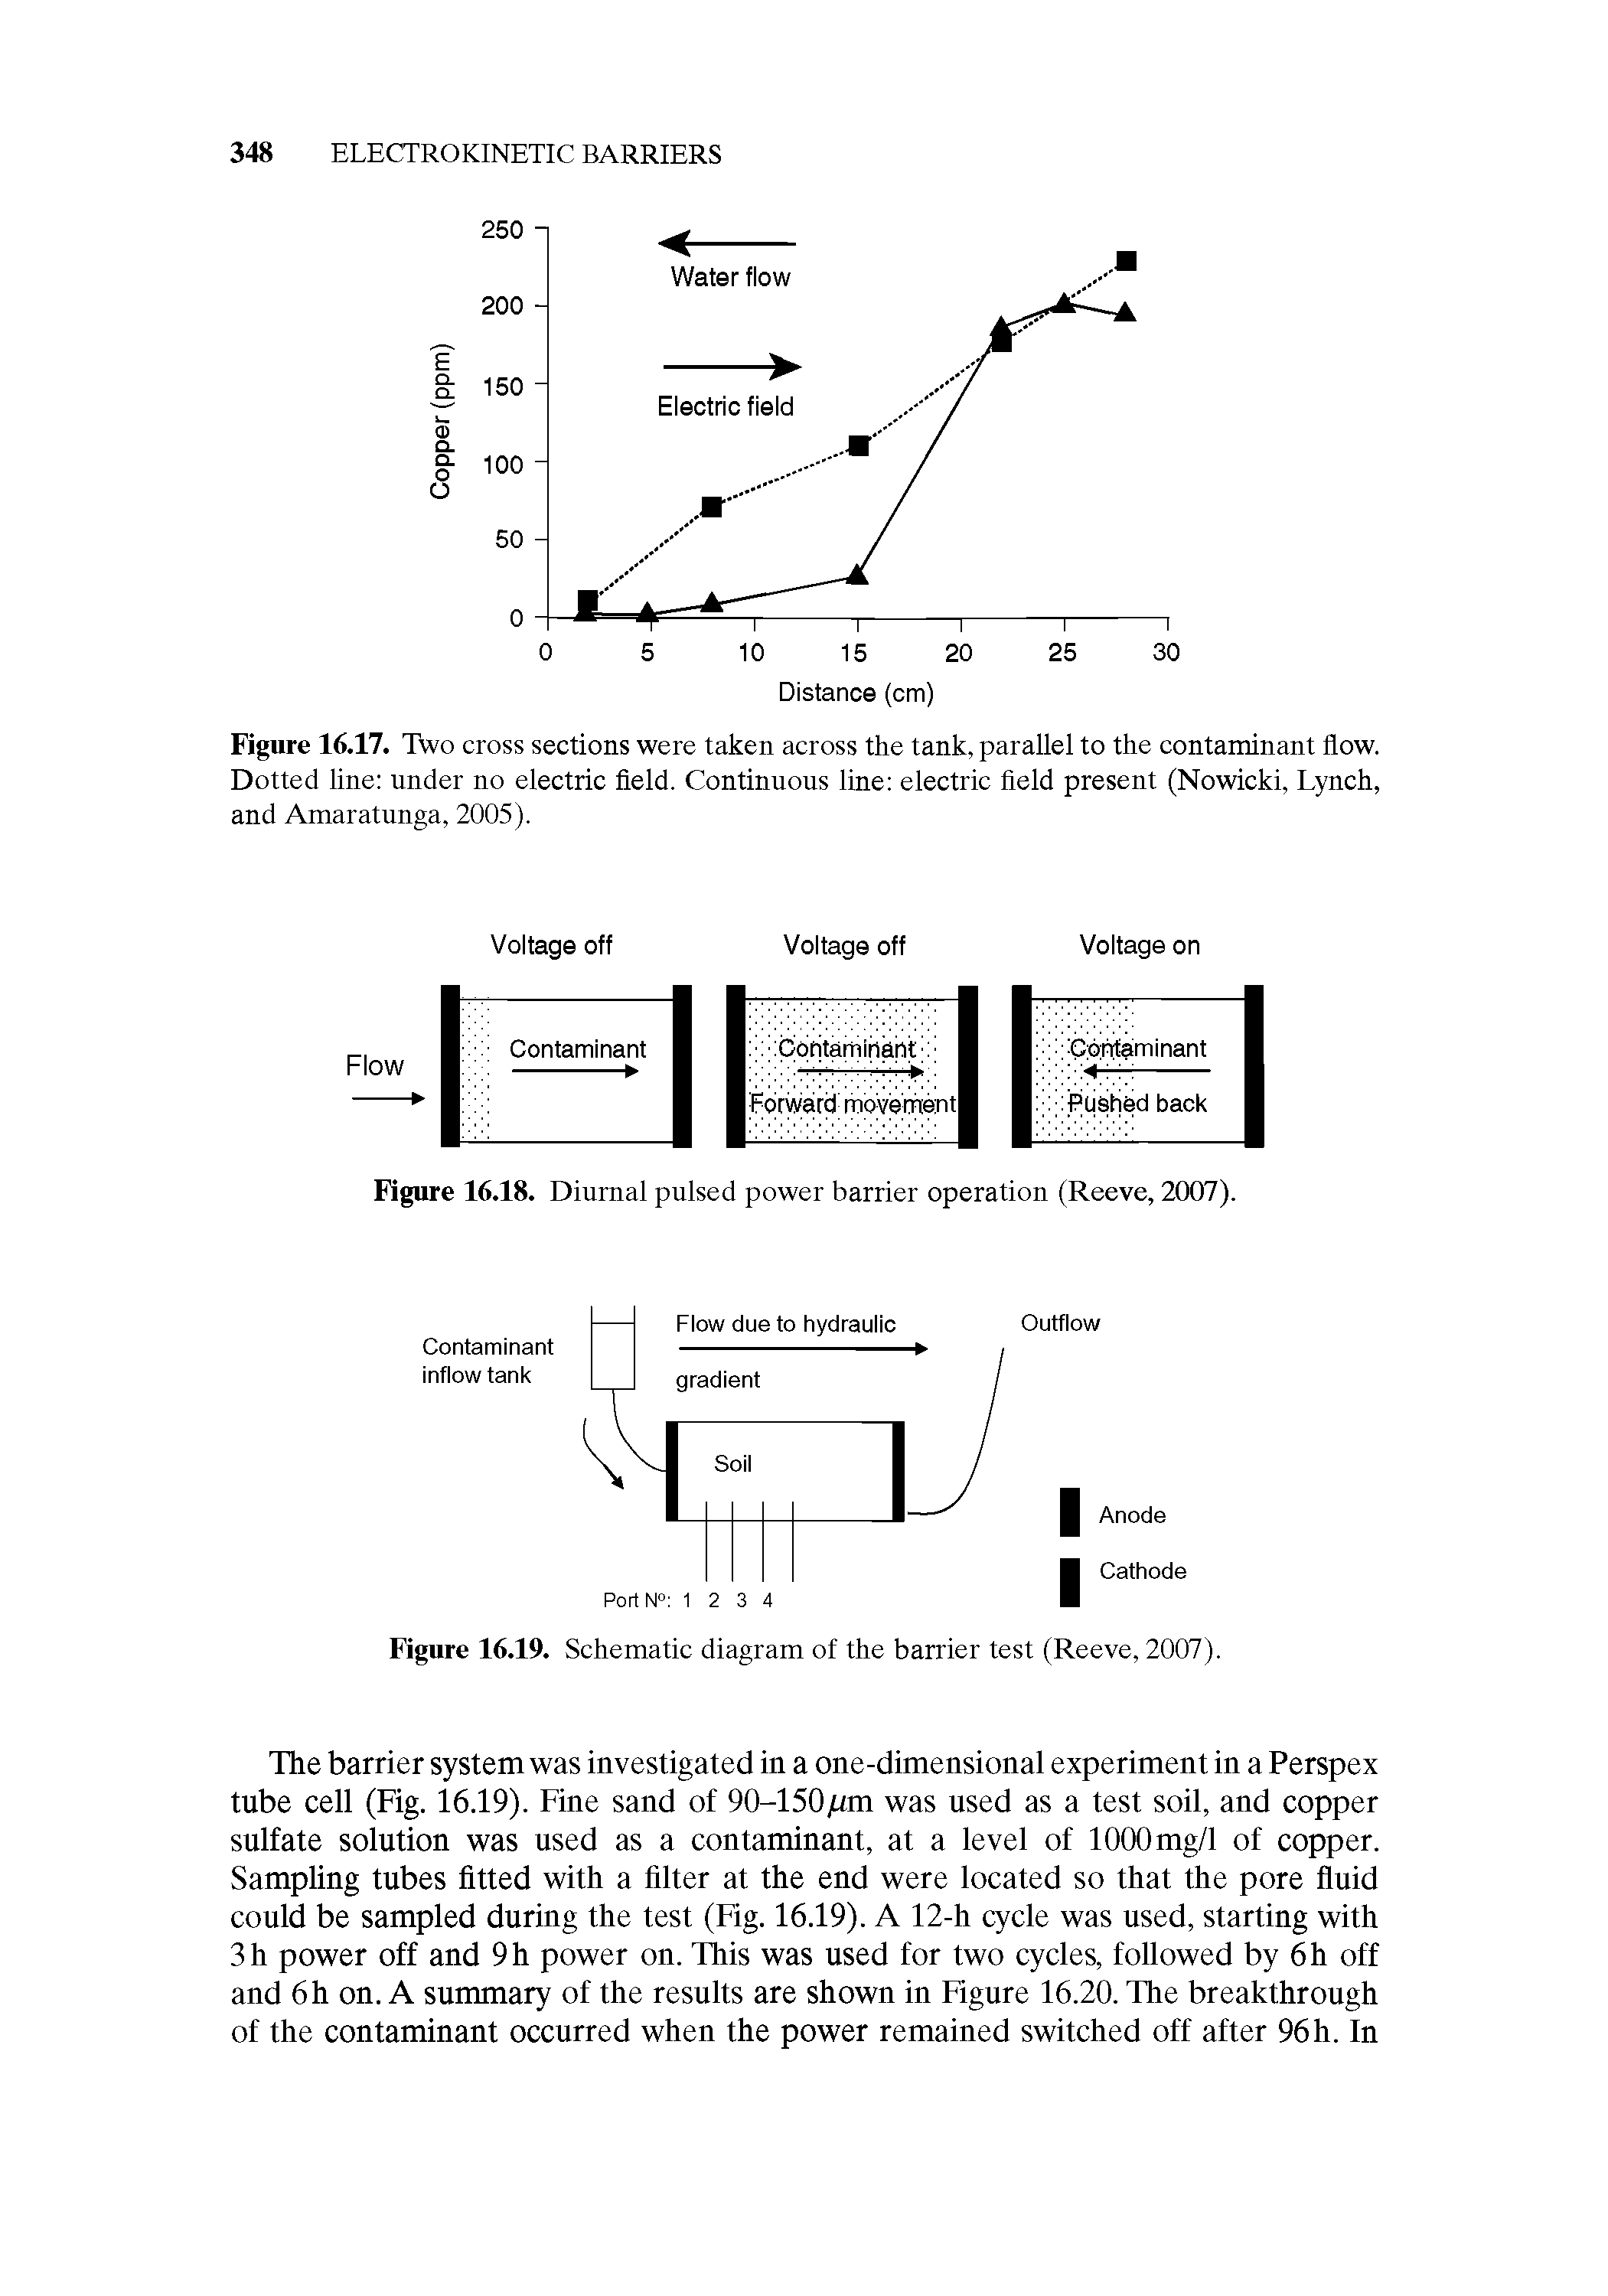 Figure 16.19. Schematic diagram of the barrier test (Reeve, 2007).